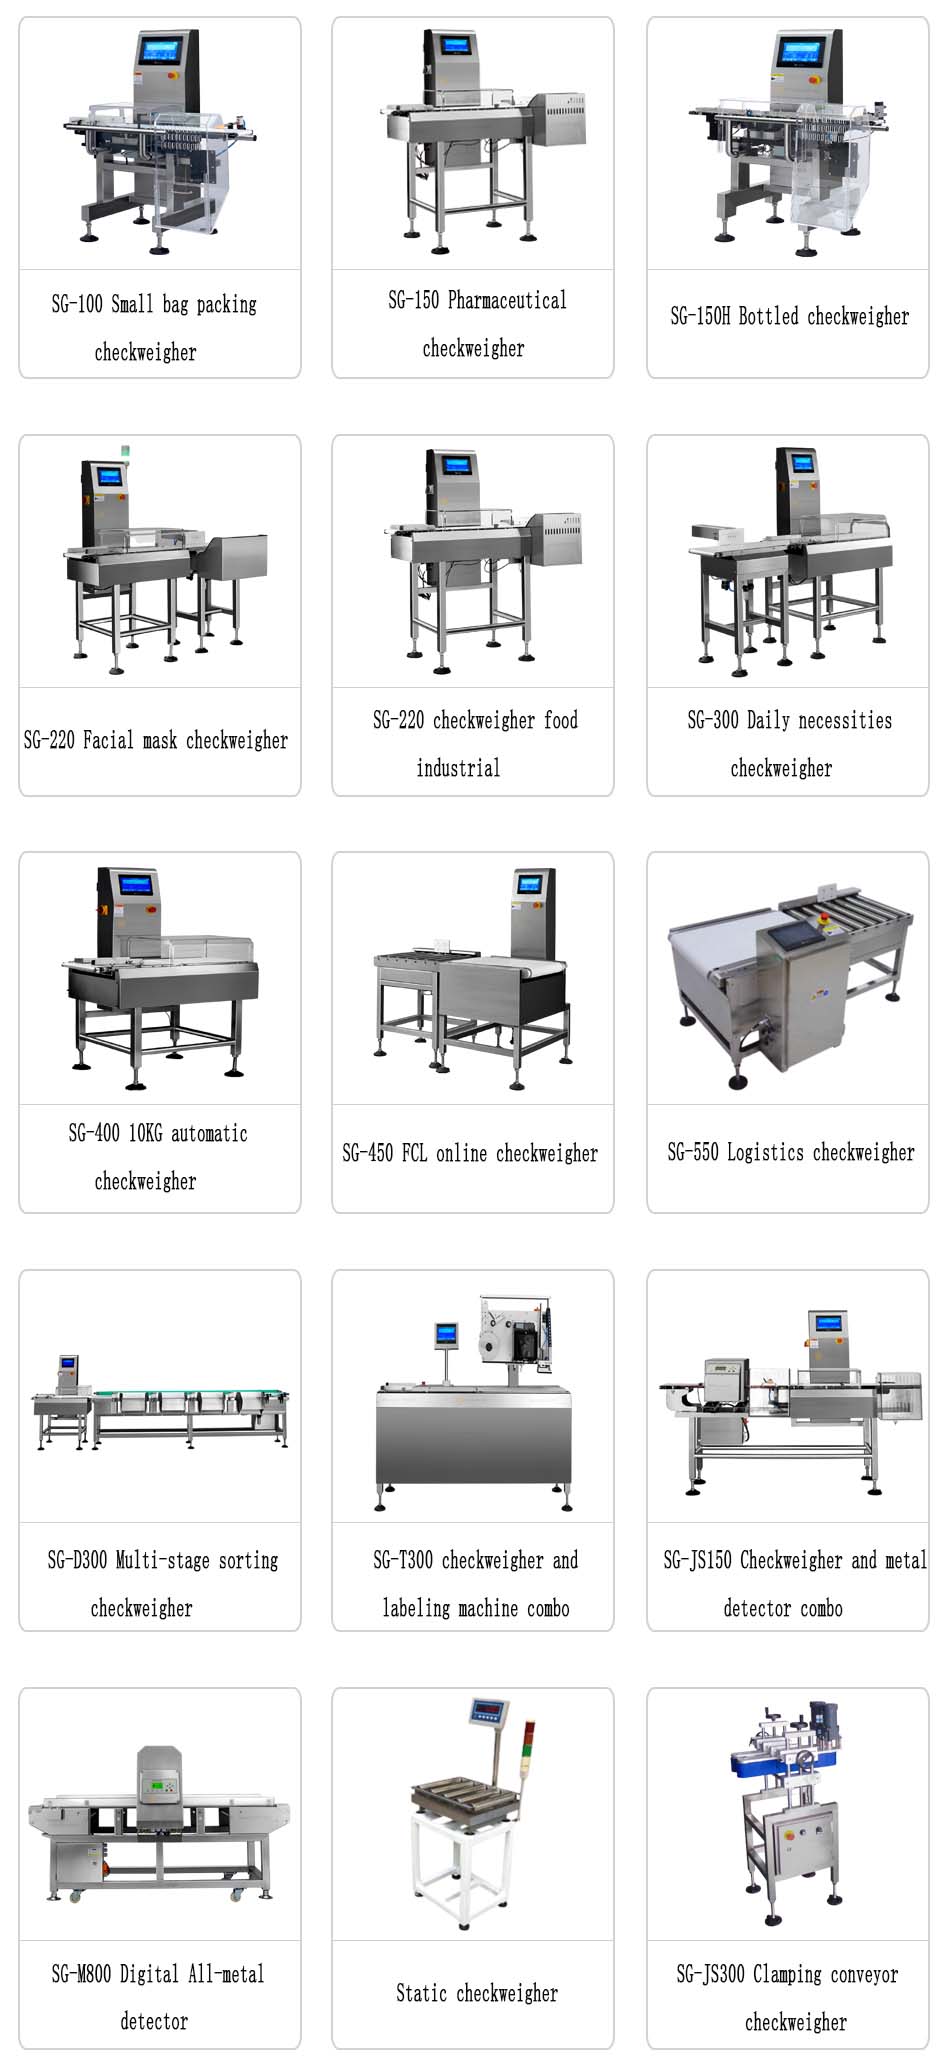 Dynamic Checkweigher With Reject System